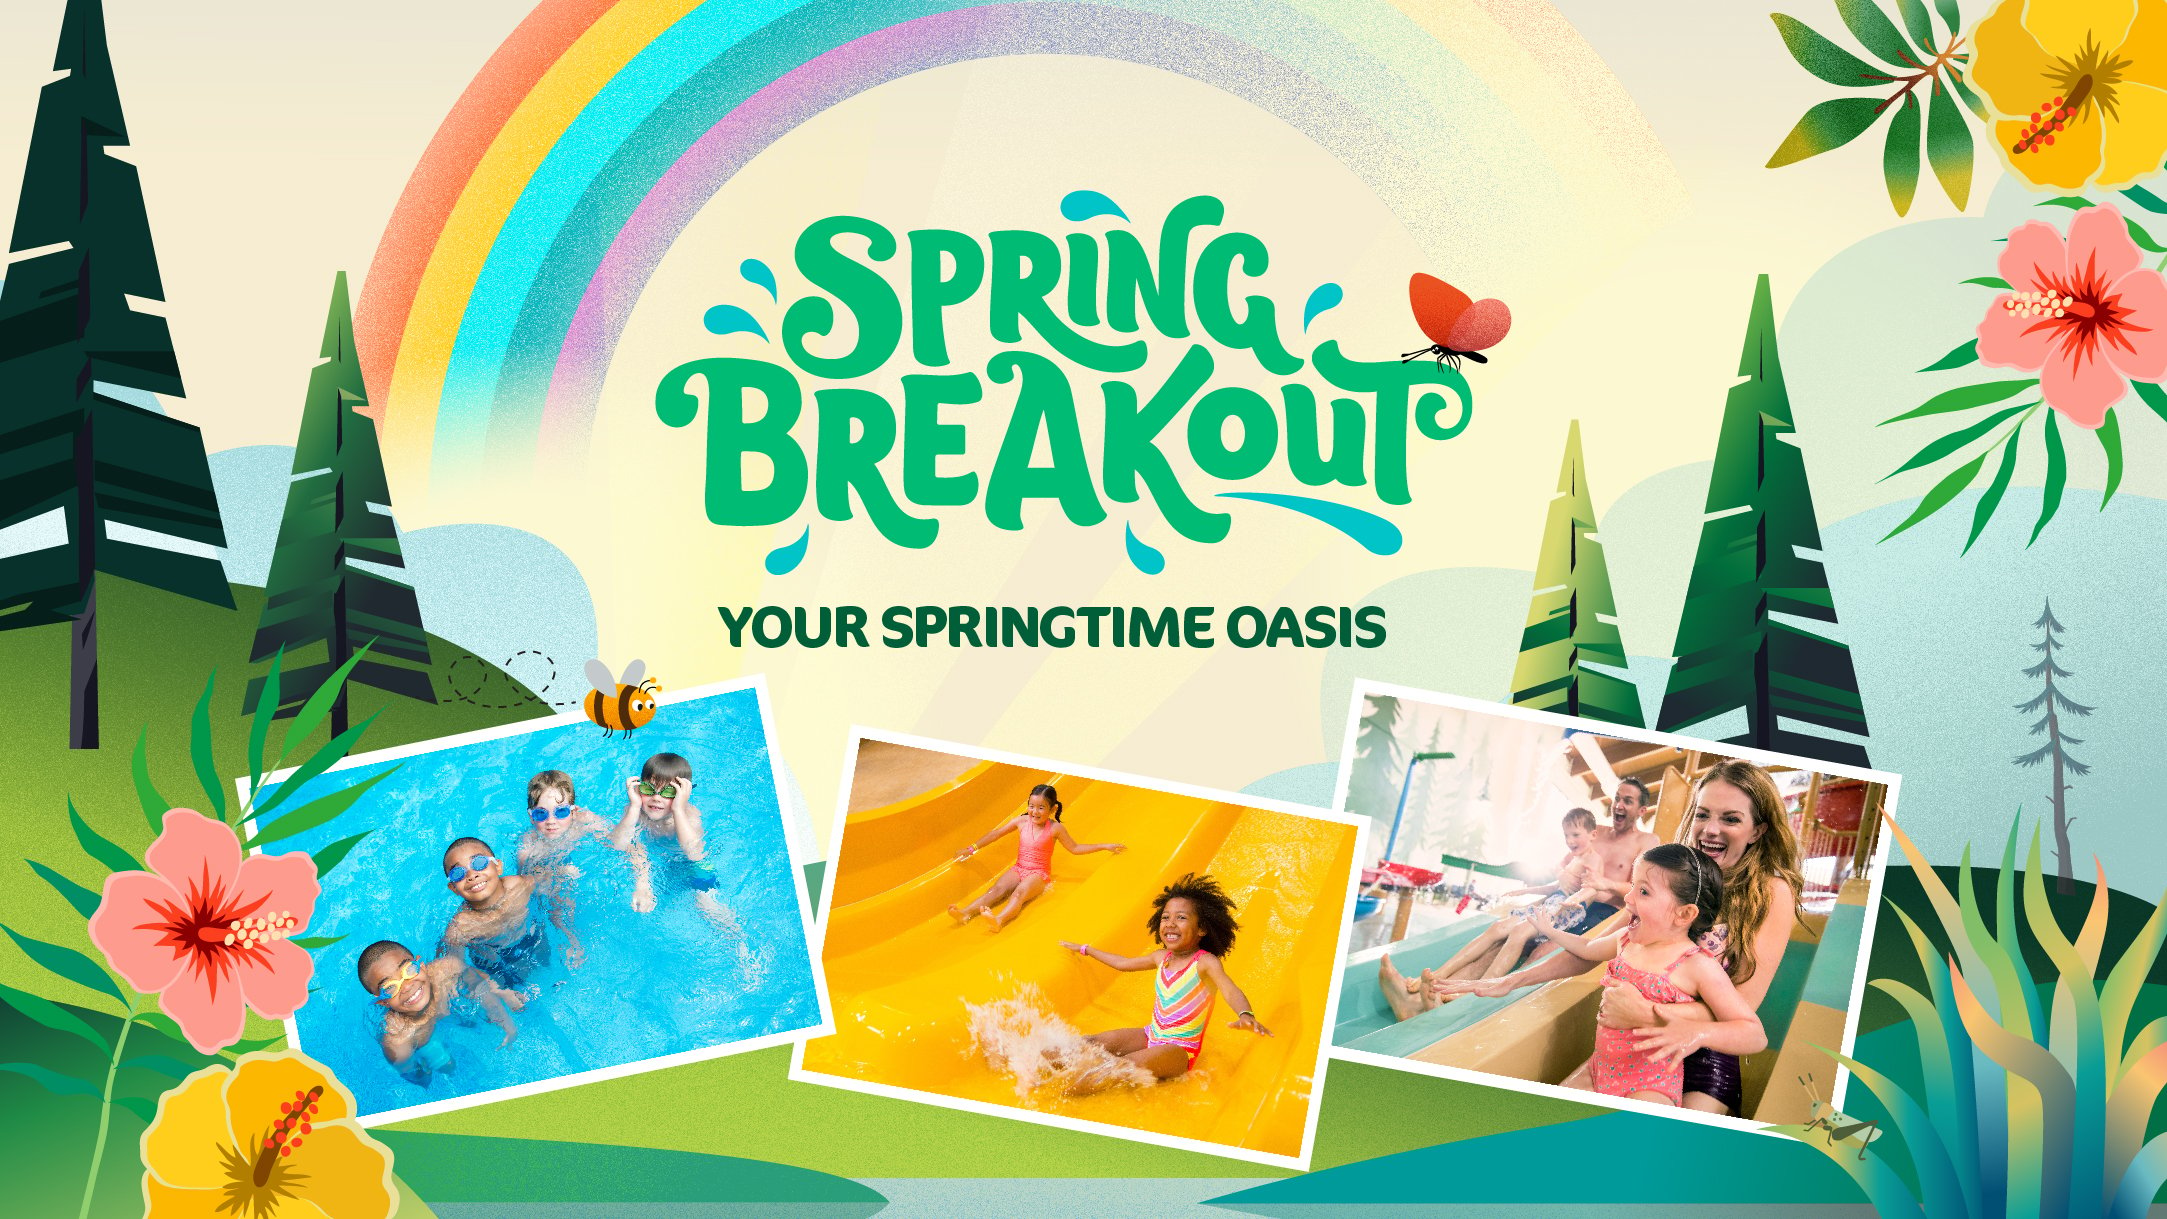 Illustration of Spring breakout at Great Wolf Lodge